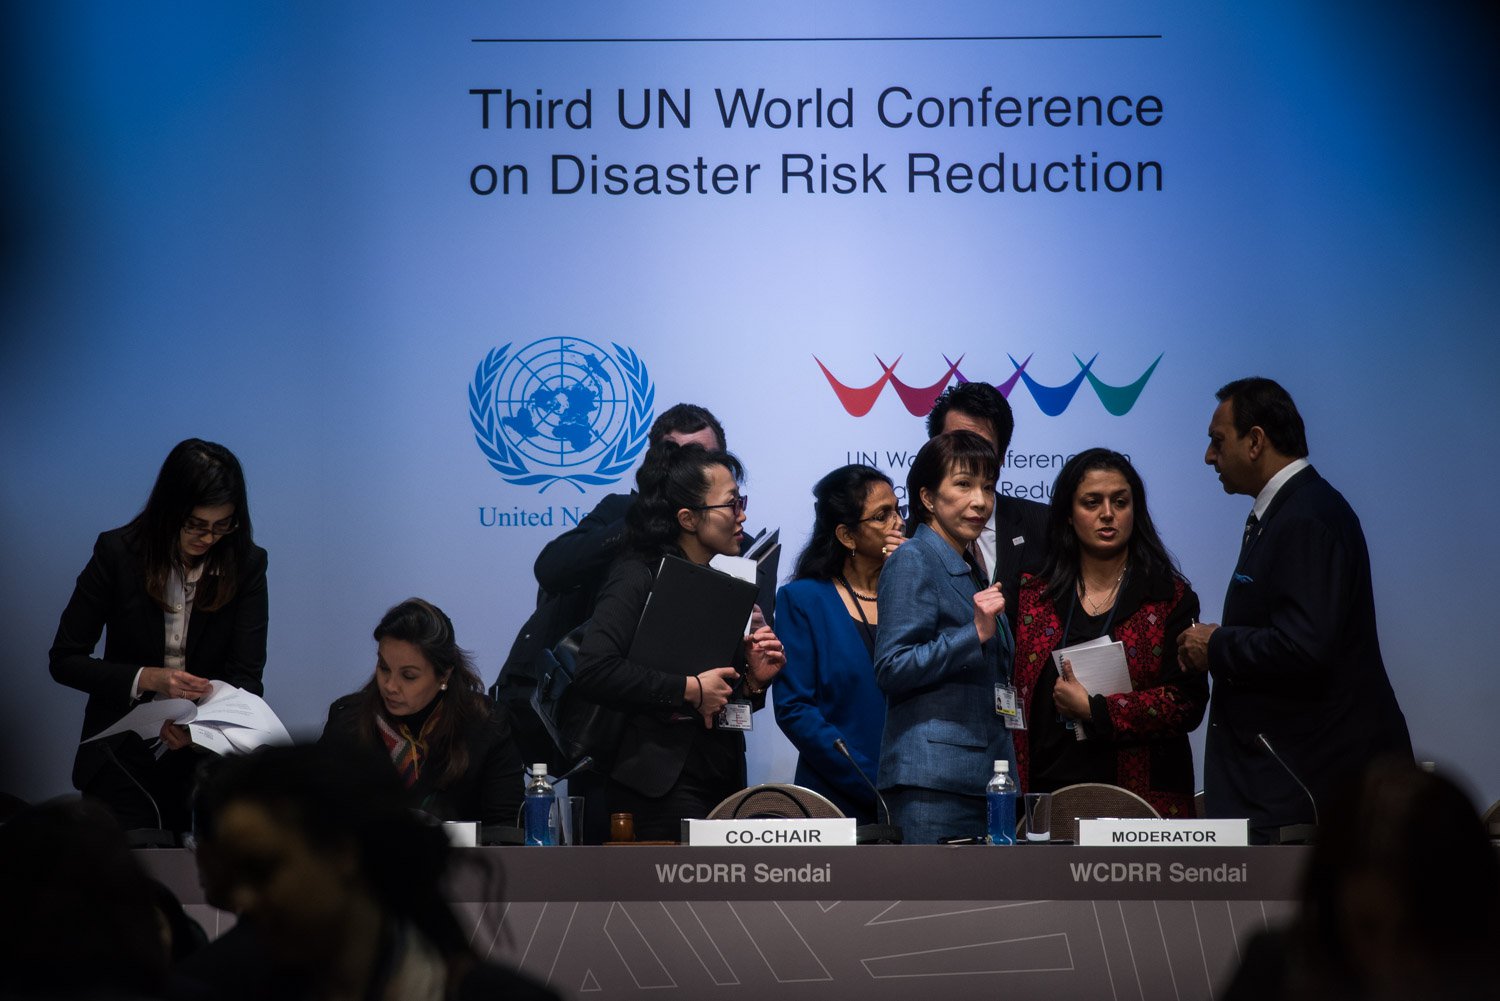 : Minister of Internal Affairs and Communications of Japan discussing before the Third UN World Conference on Disaster Risk Reduction.